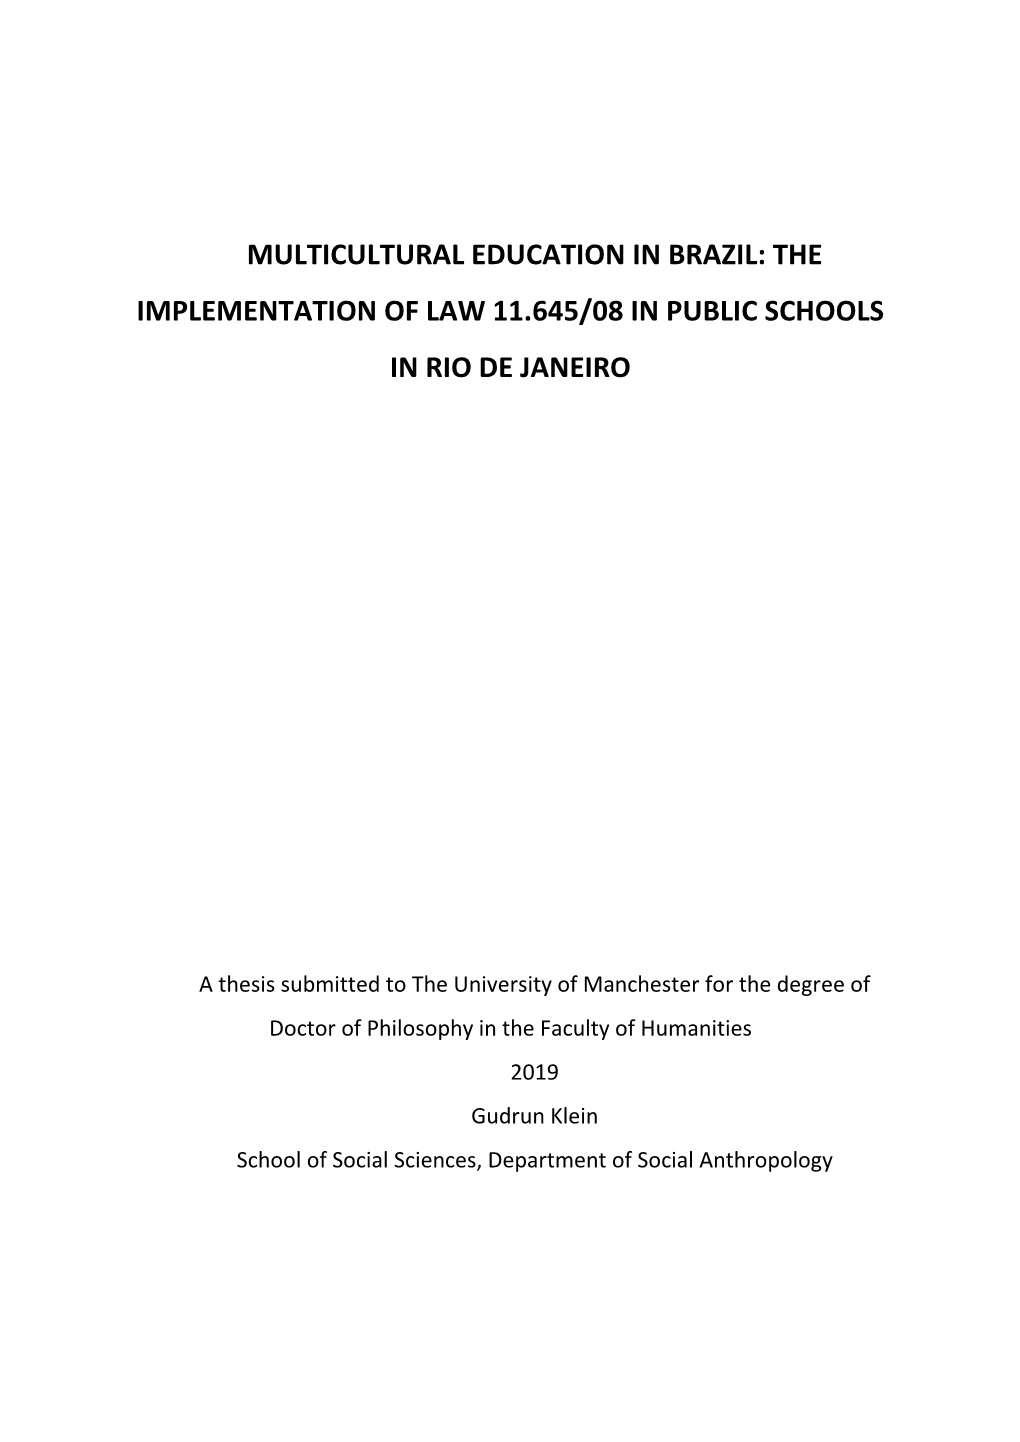 Social and Racial Dimensions of Brazilian Education